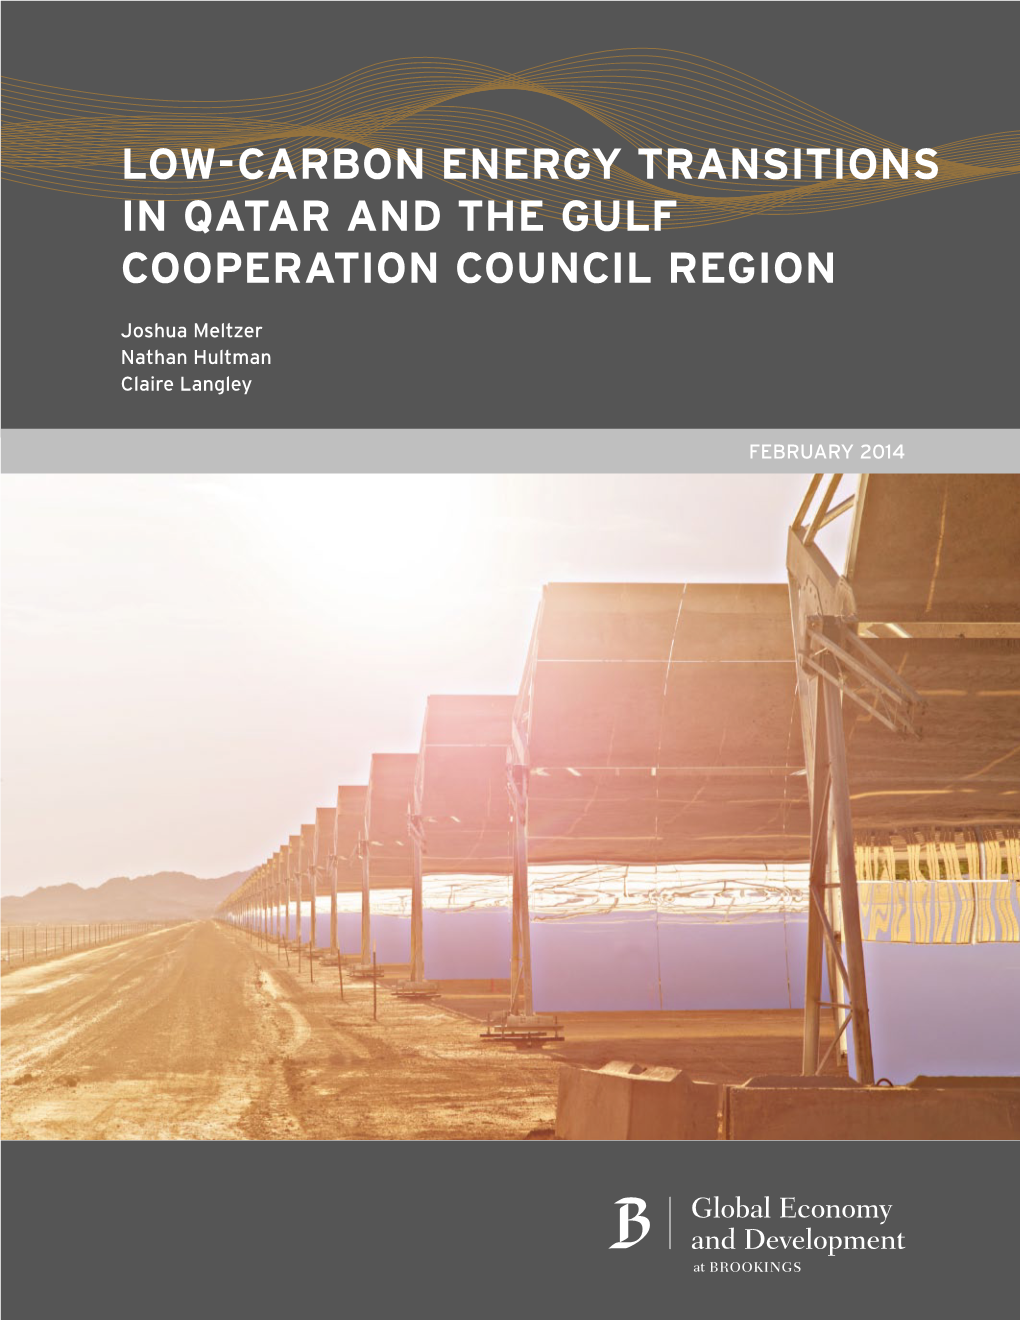 Low-Carbon Energy Transitions in Qatar and the Gulf Cooperation Council Region